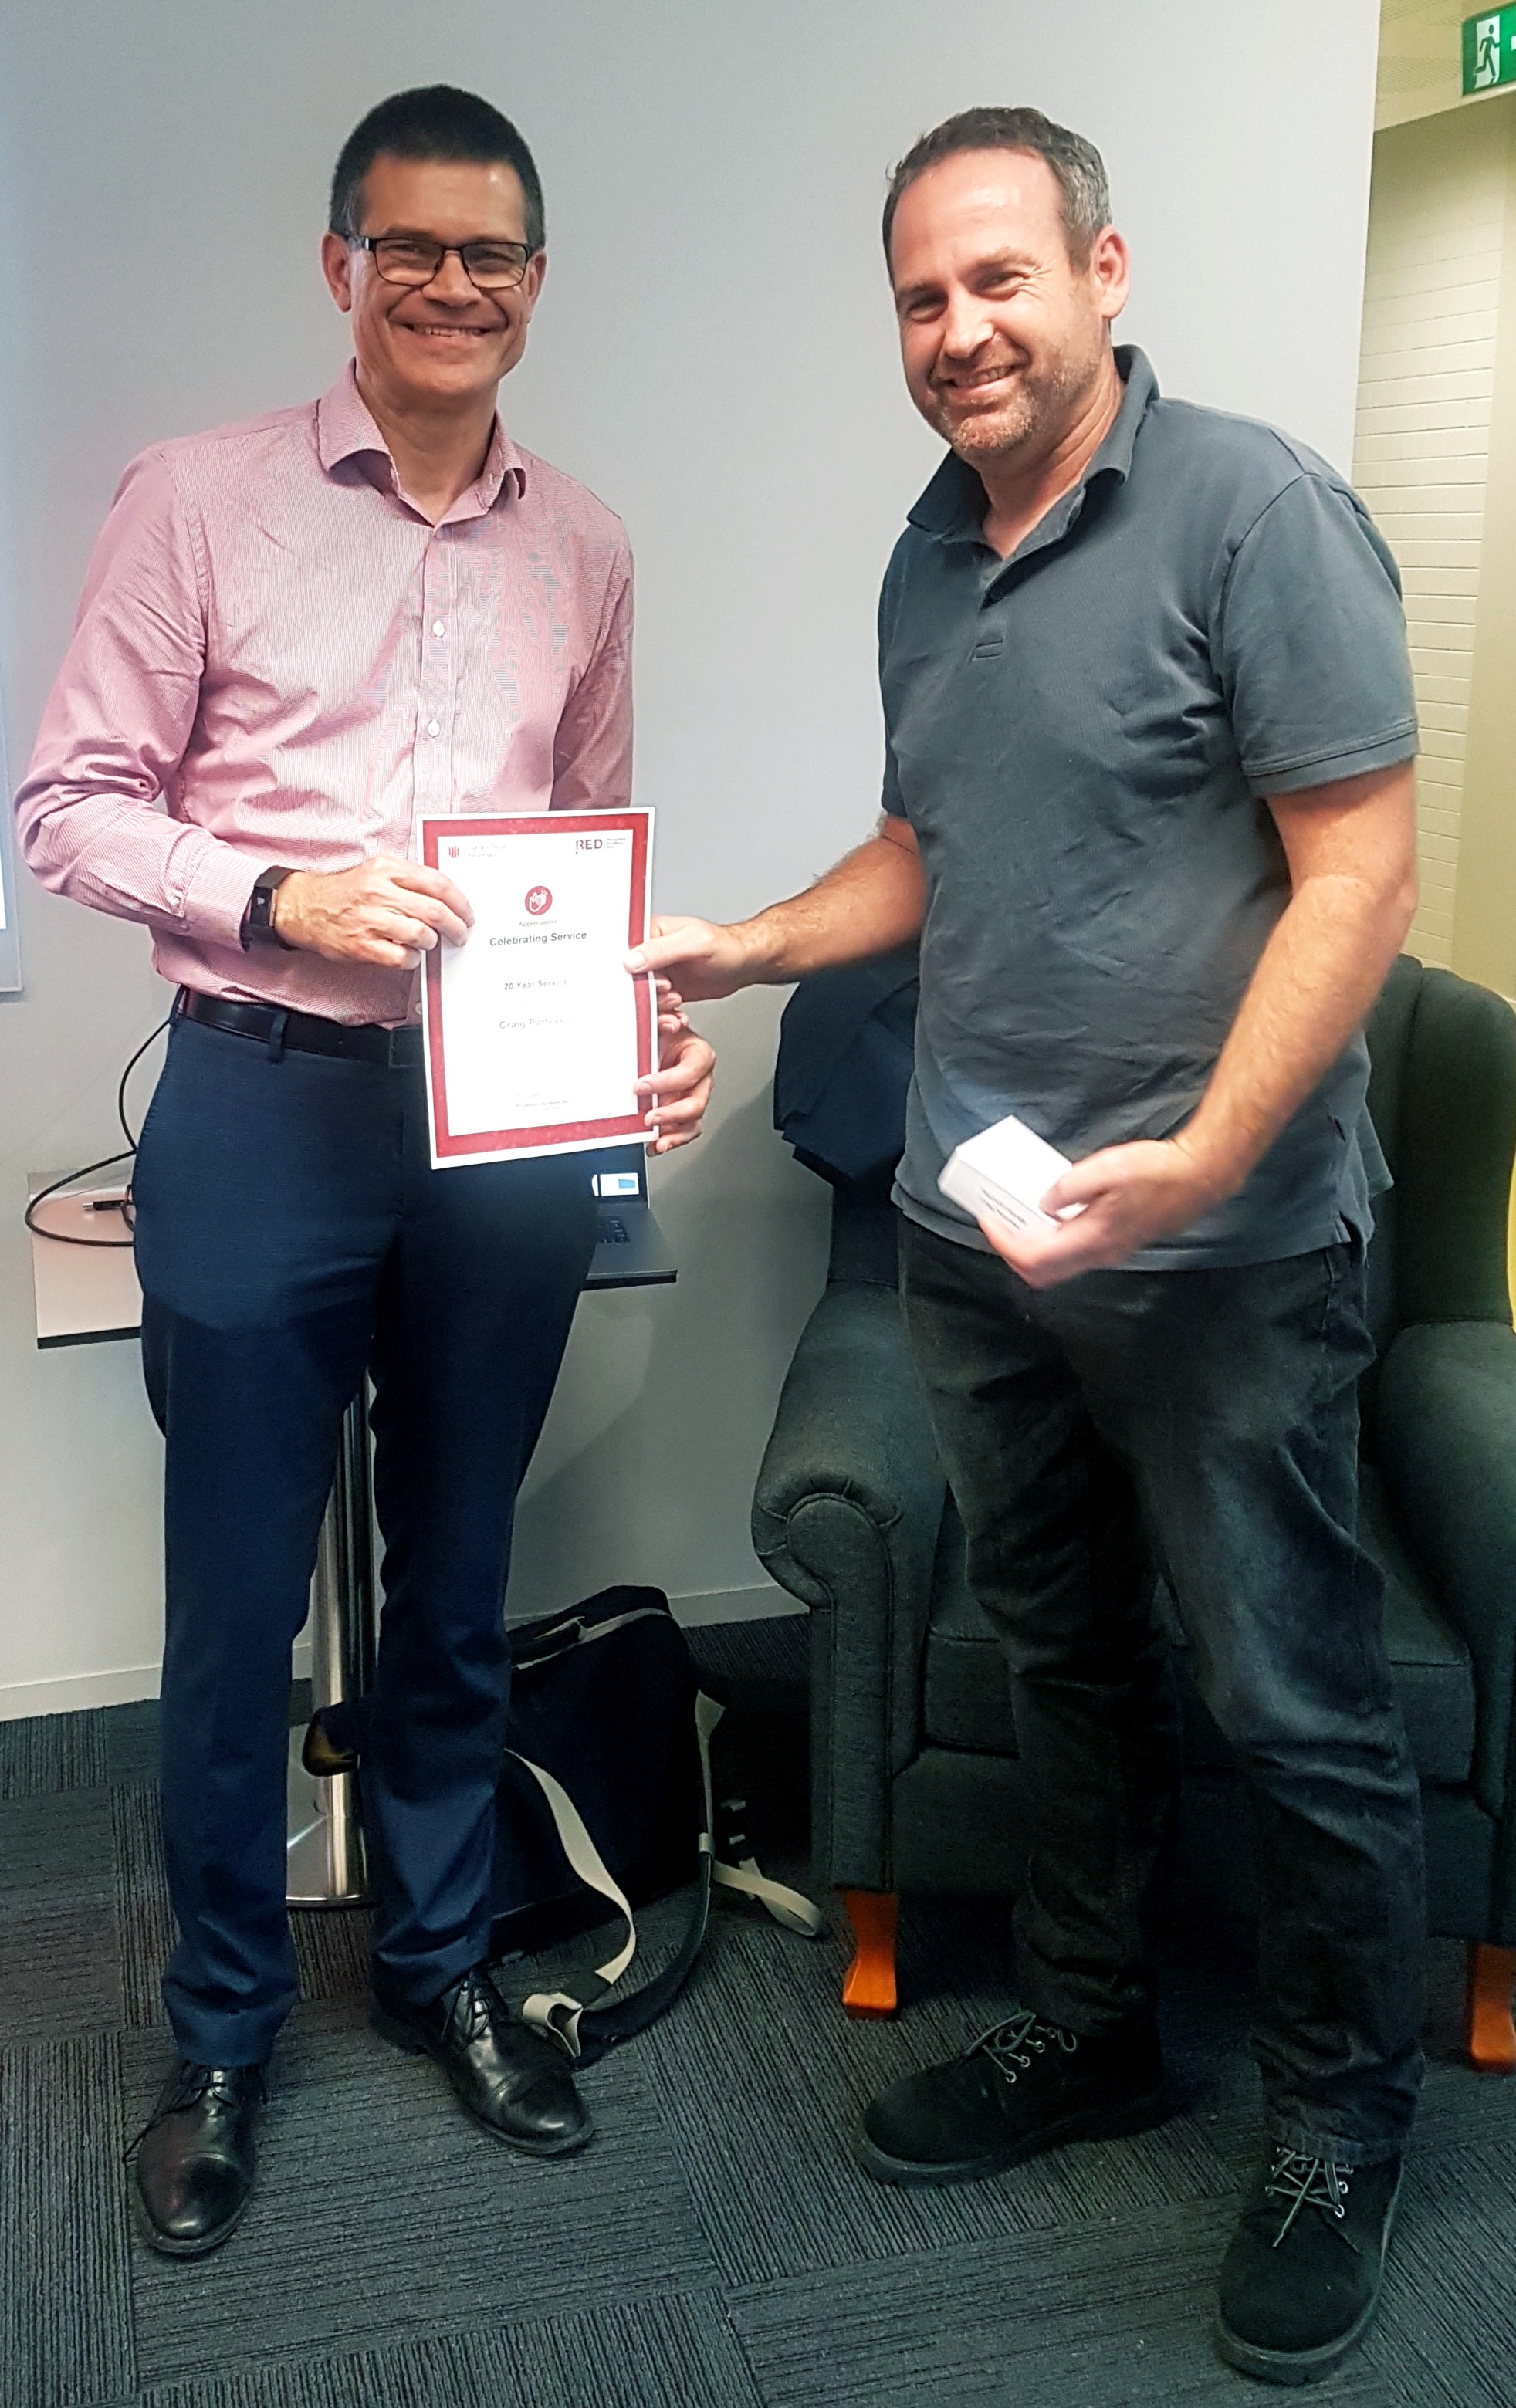 Craig Patterson receiving his 20-year service medal from Andy Vann on Wagga Wagga campus